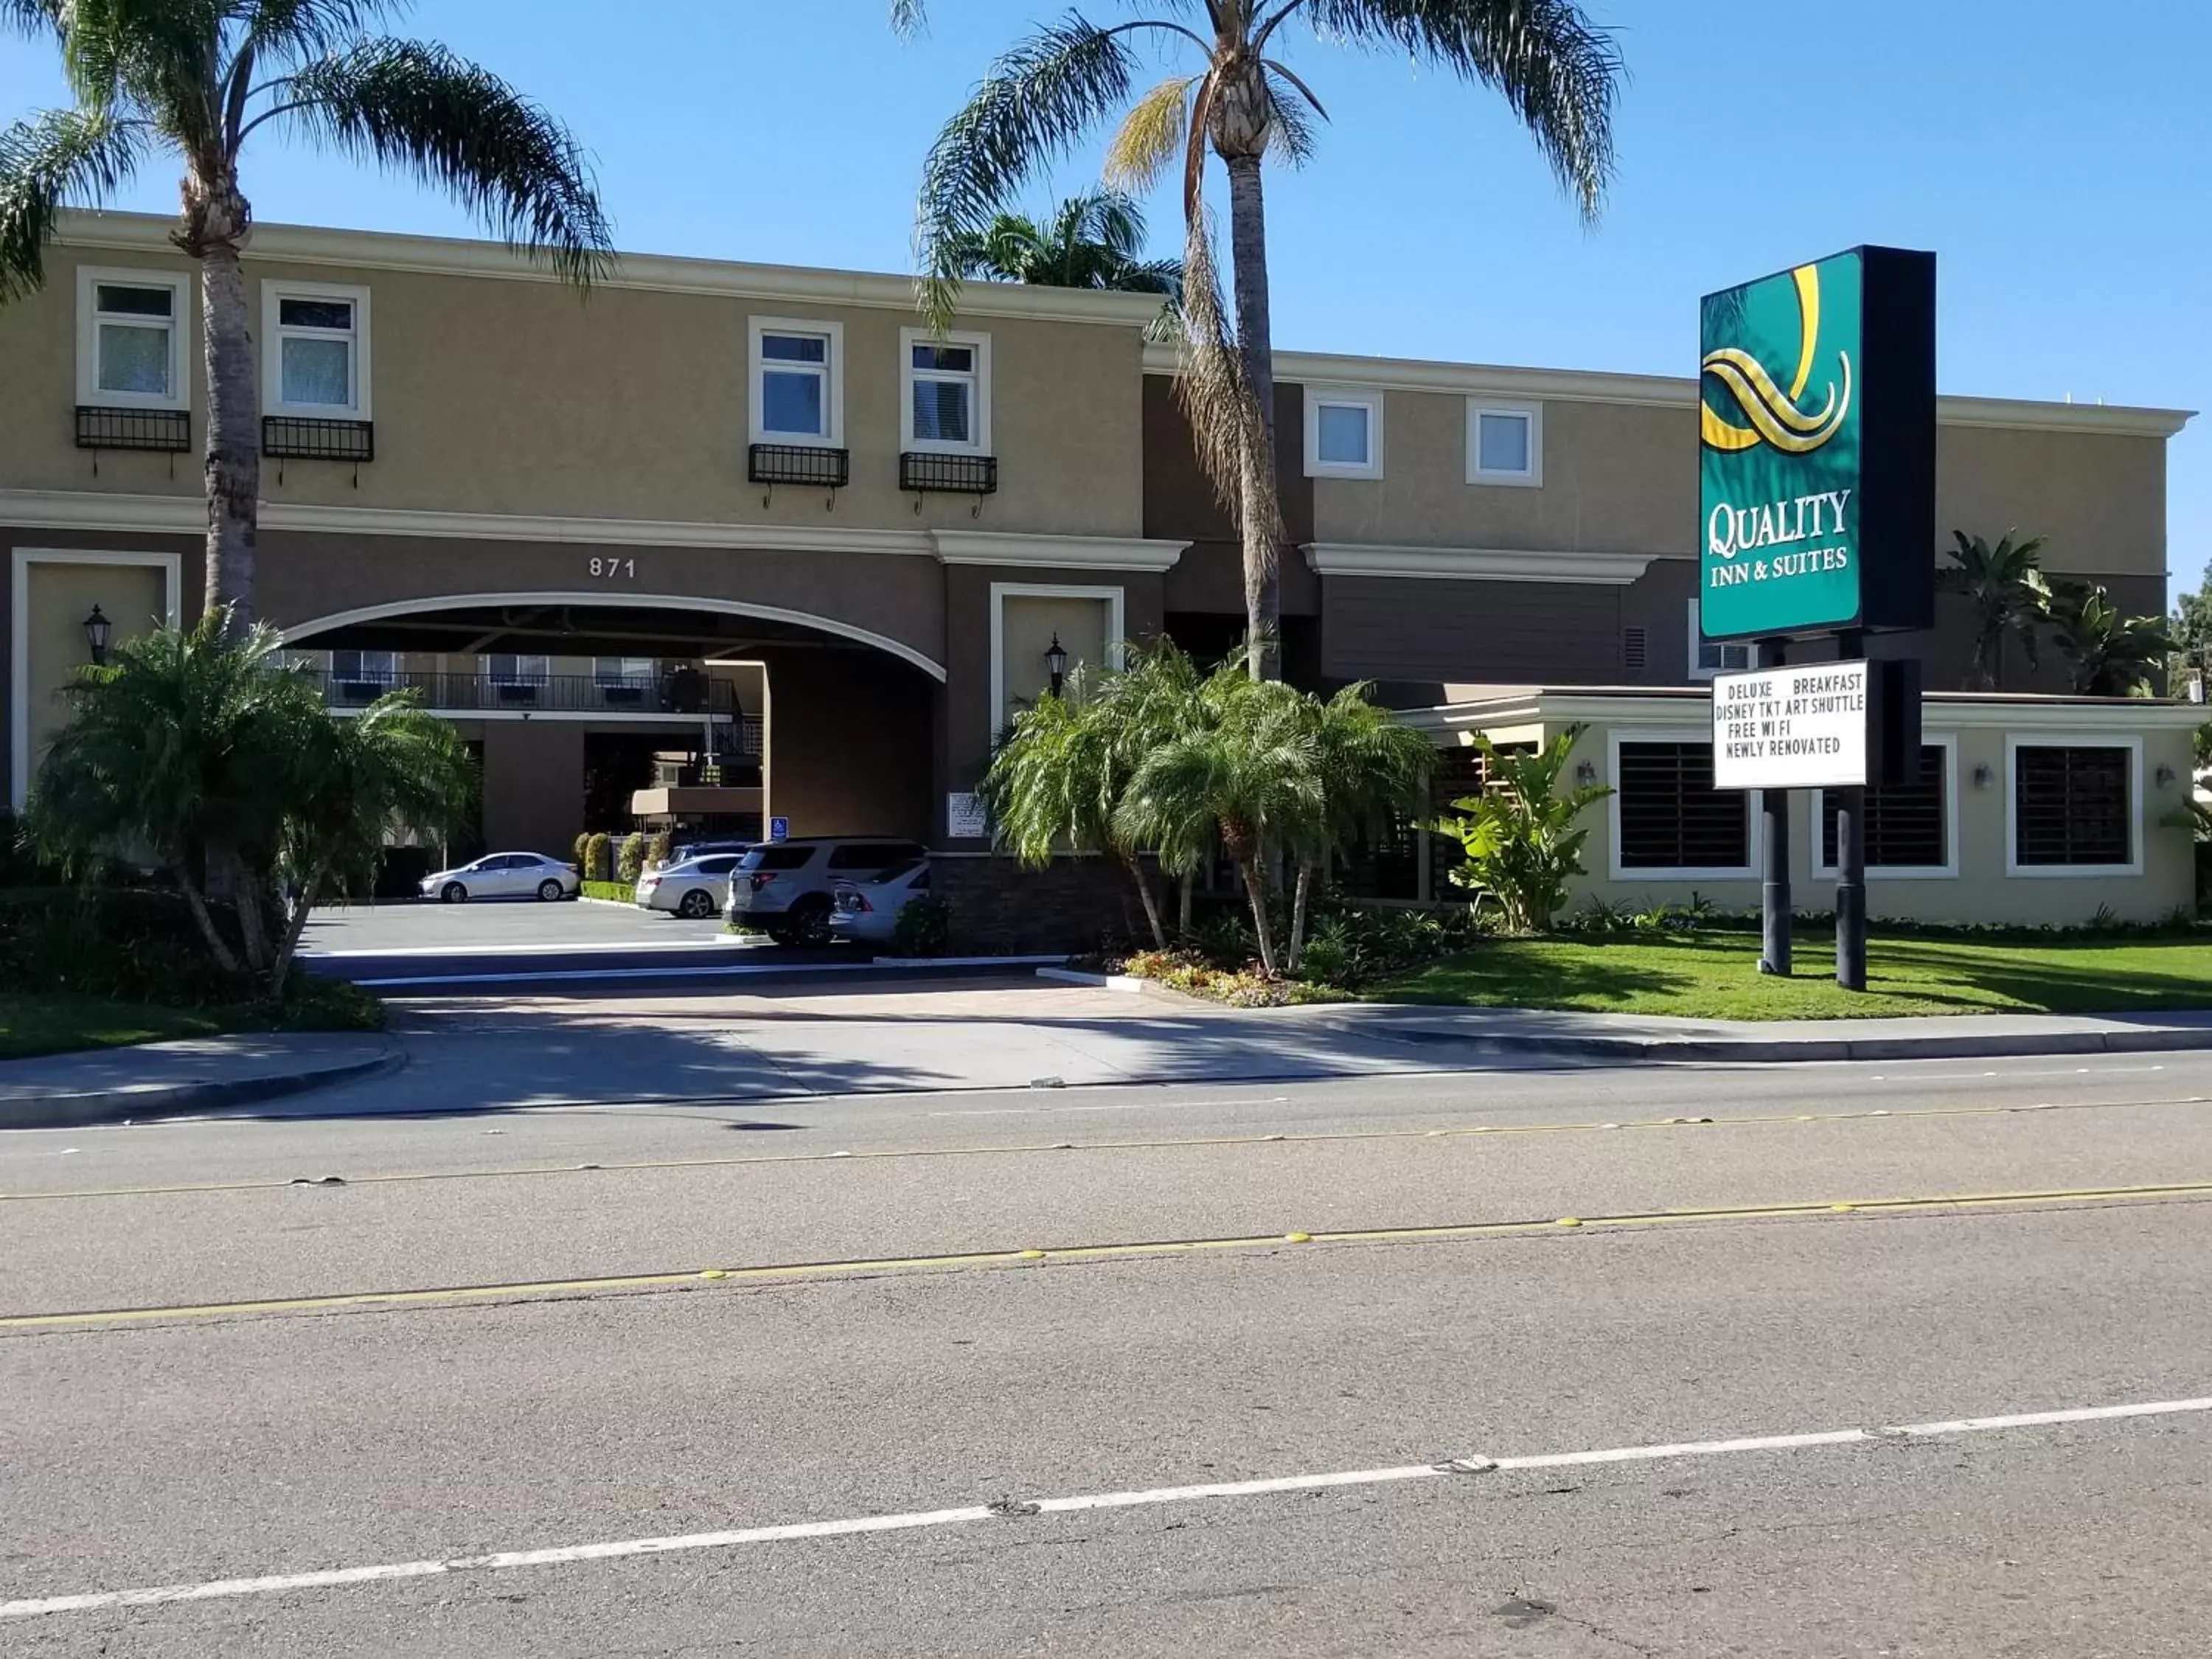 Property Building in Quality Inn & Suites Anaheim Maingate